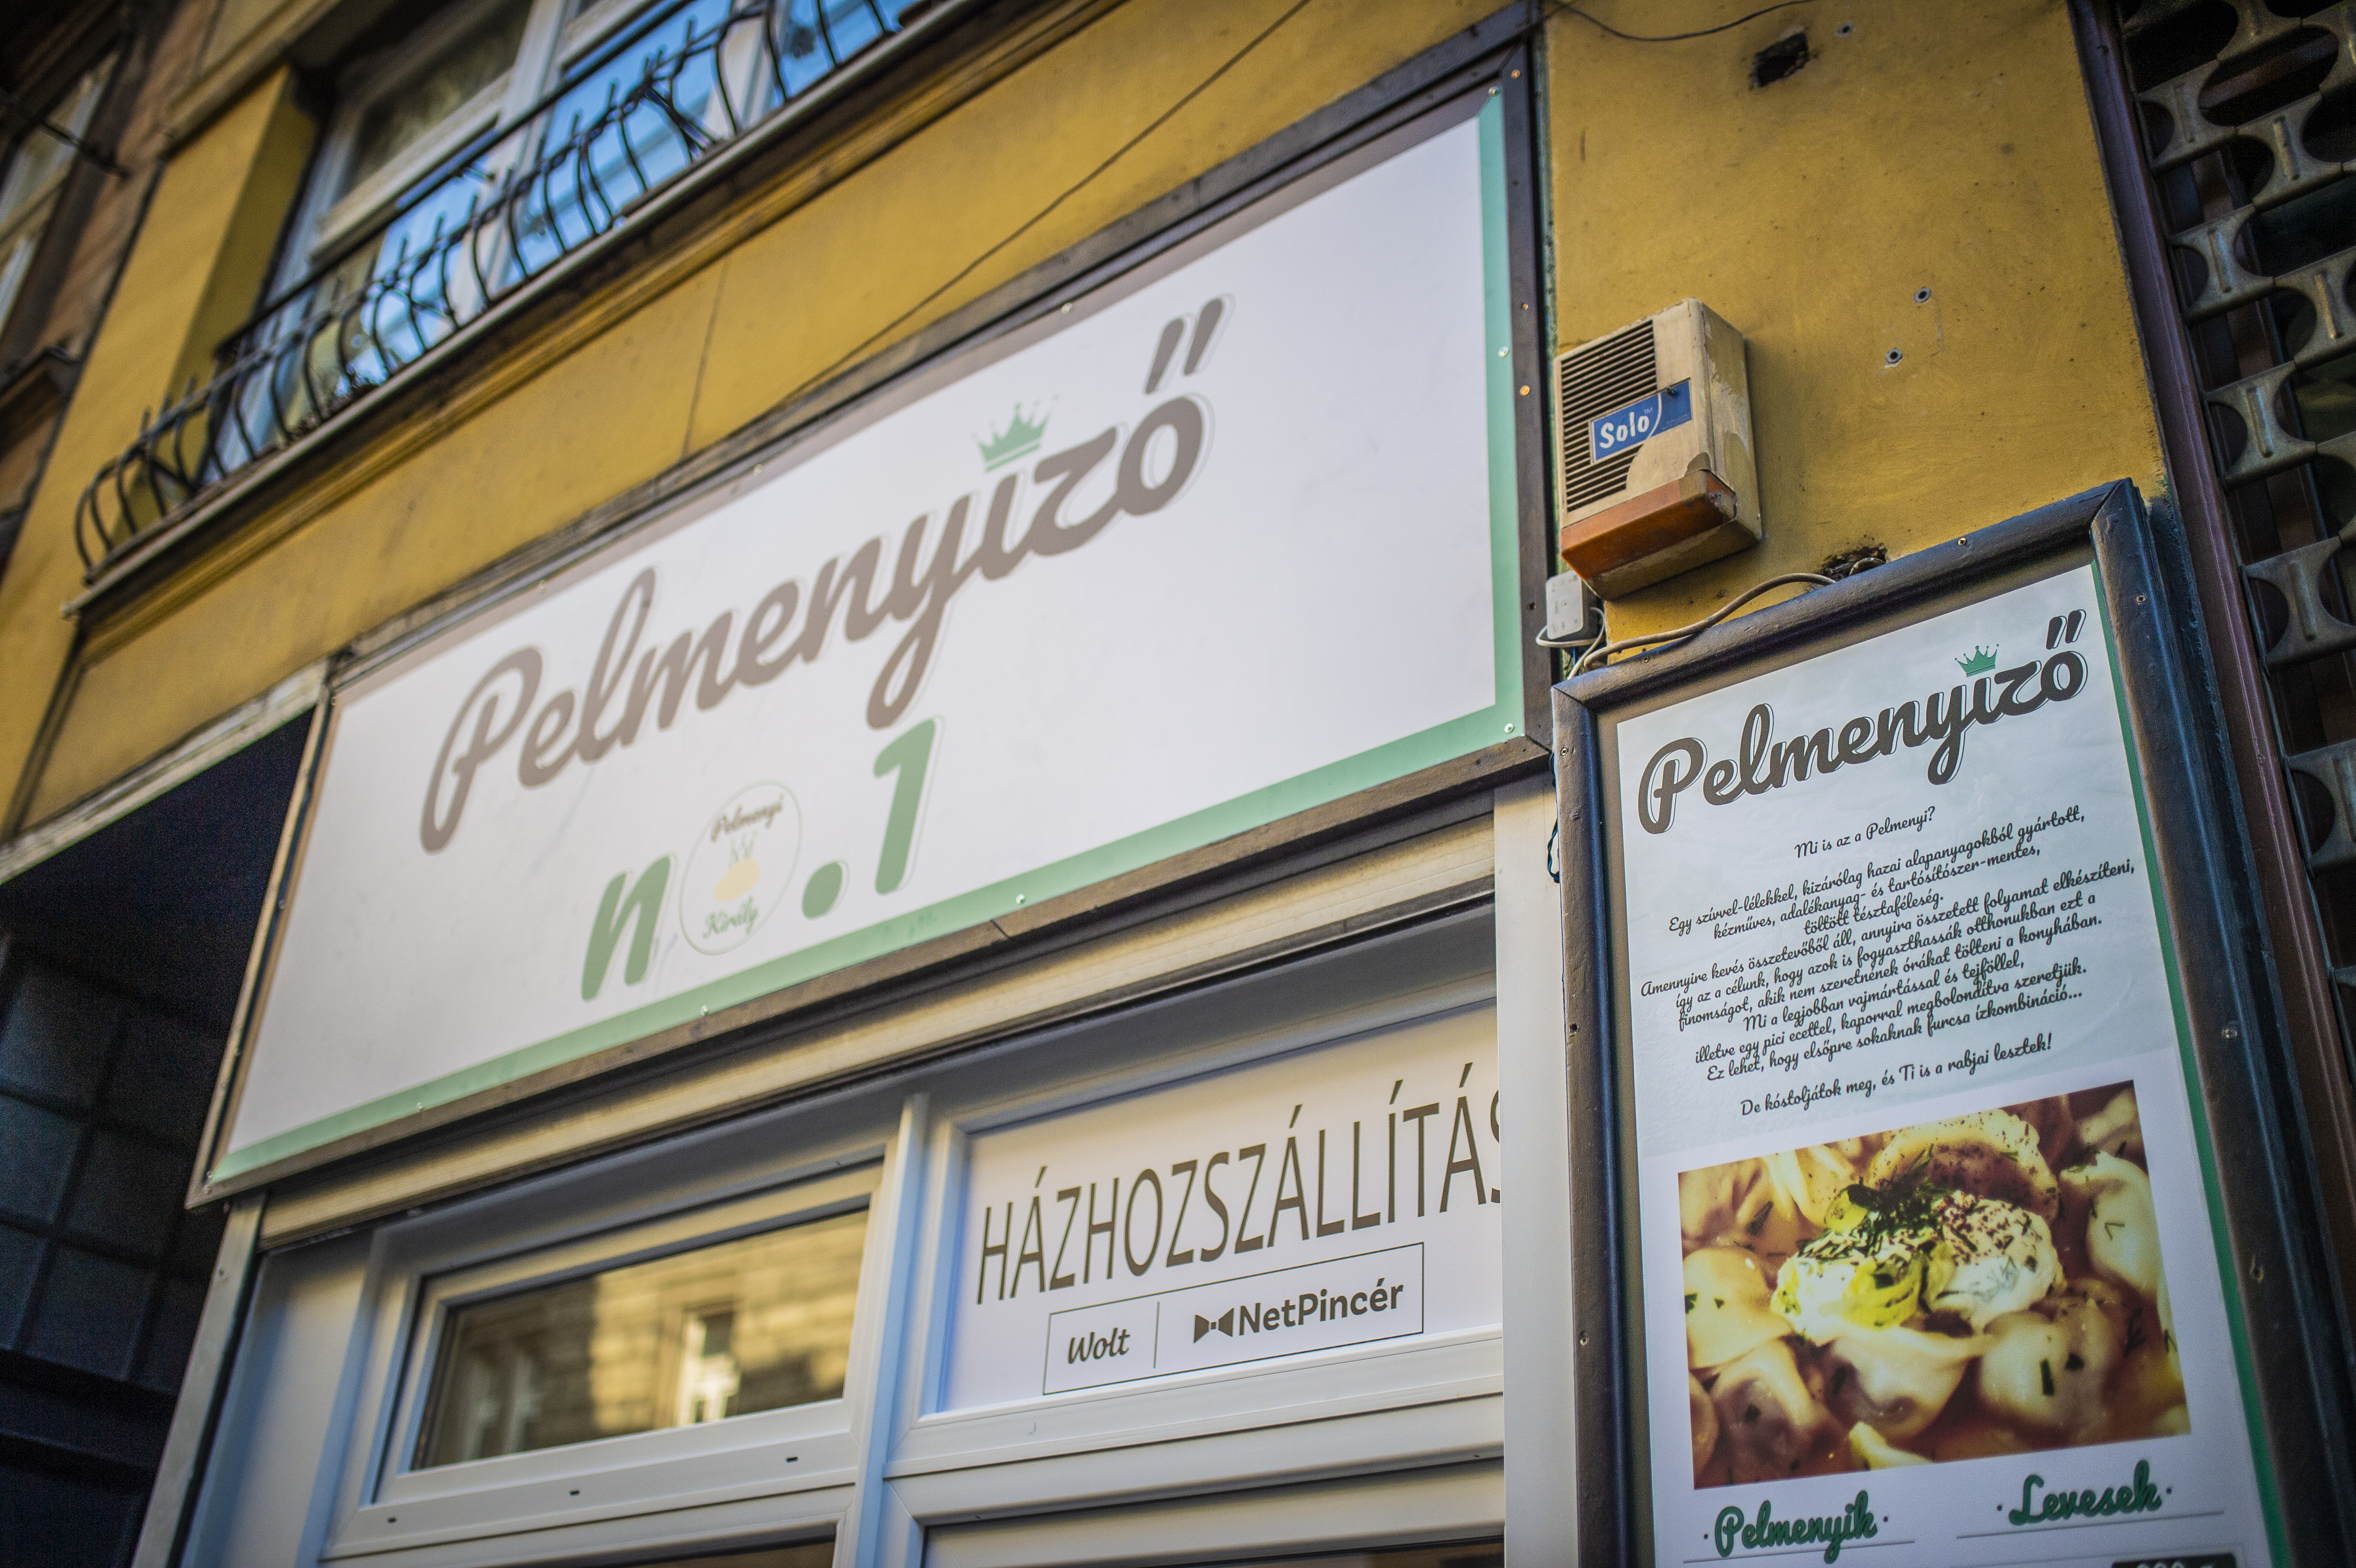 From Russia with love – Pelmenyiző No.1 opens in Budapest